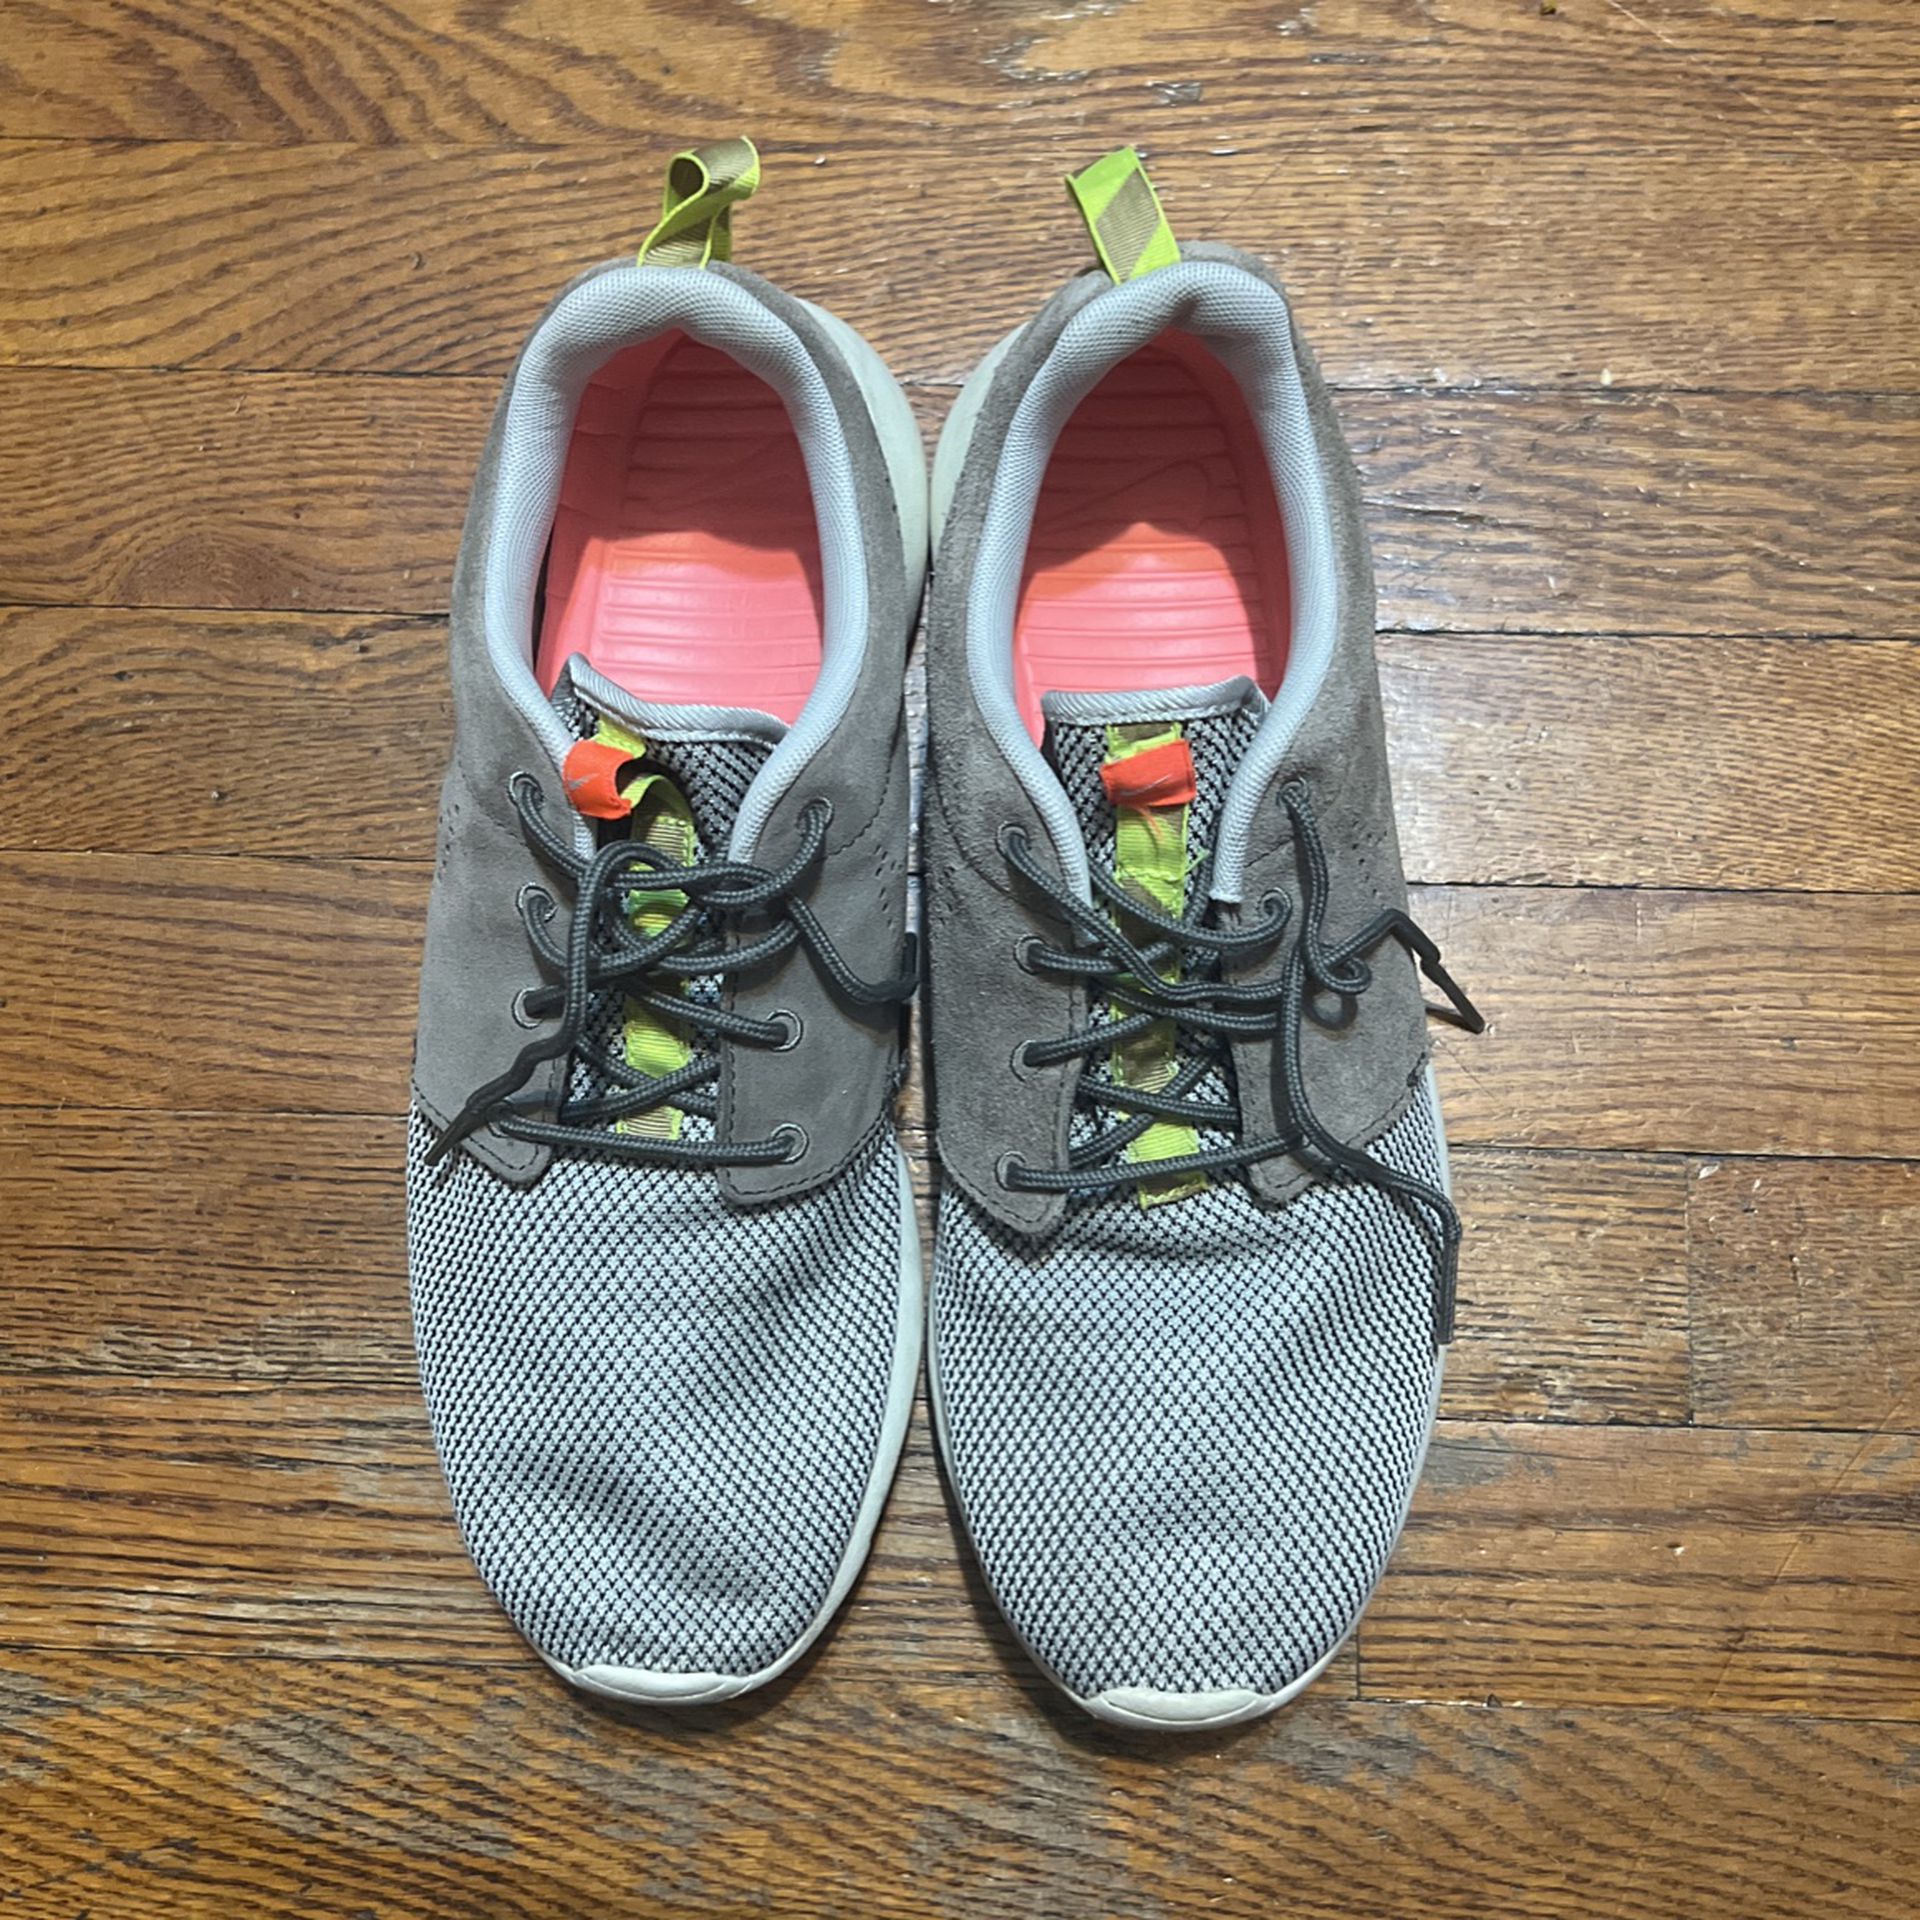 in stand houden ozon tand Nike Roshe Run for Sale in Queens, NY - OfferUp